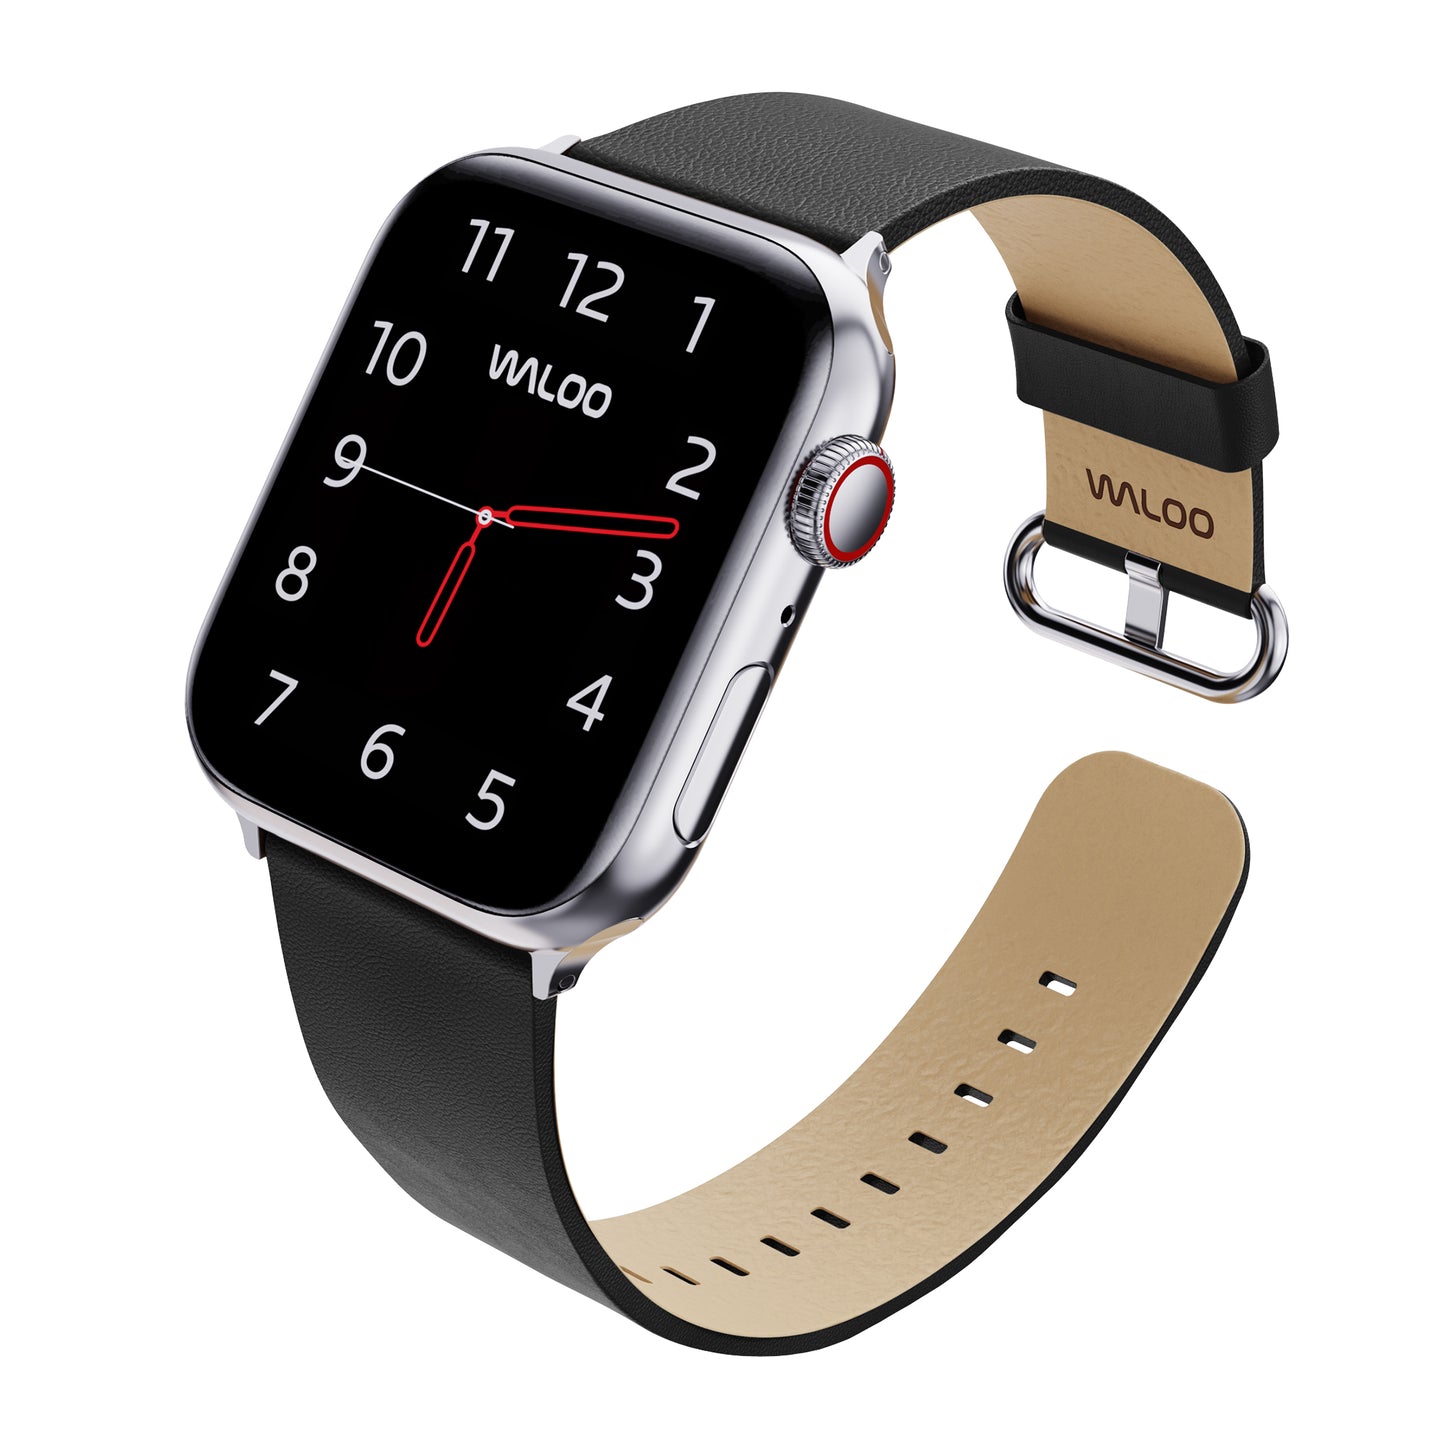 Waloo Leather Grain Band For Apple Watch